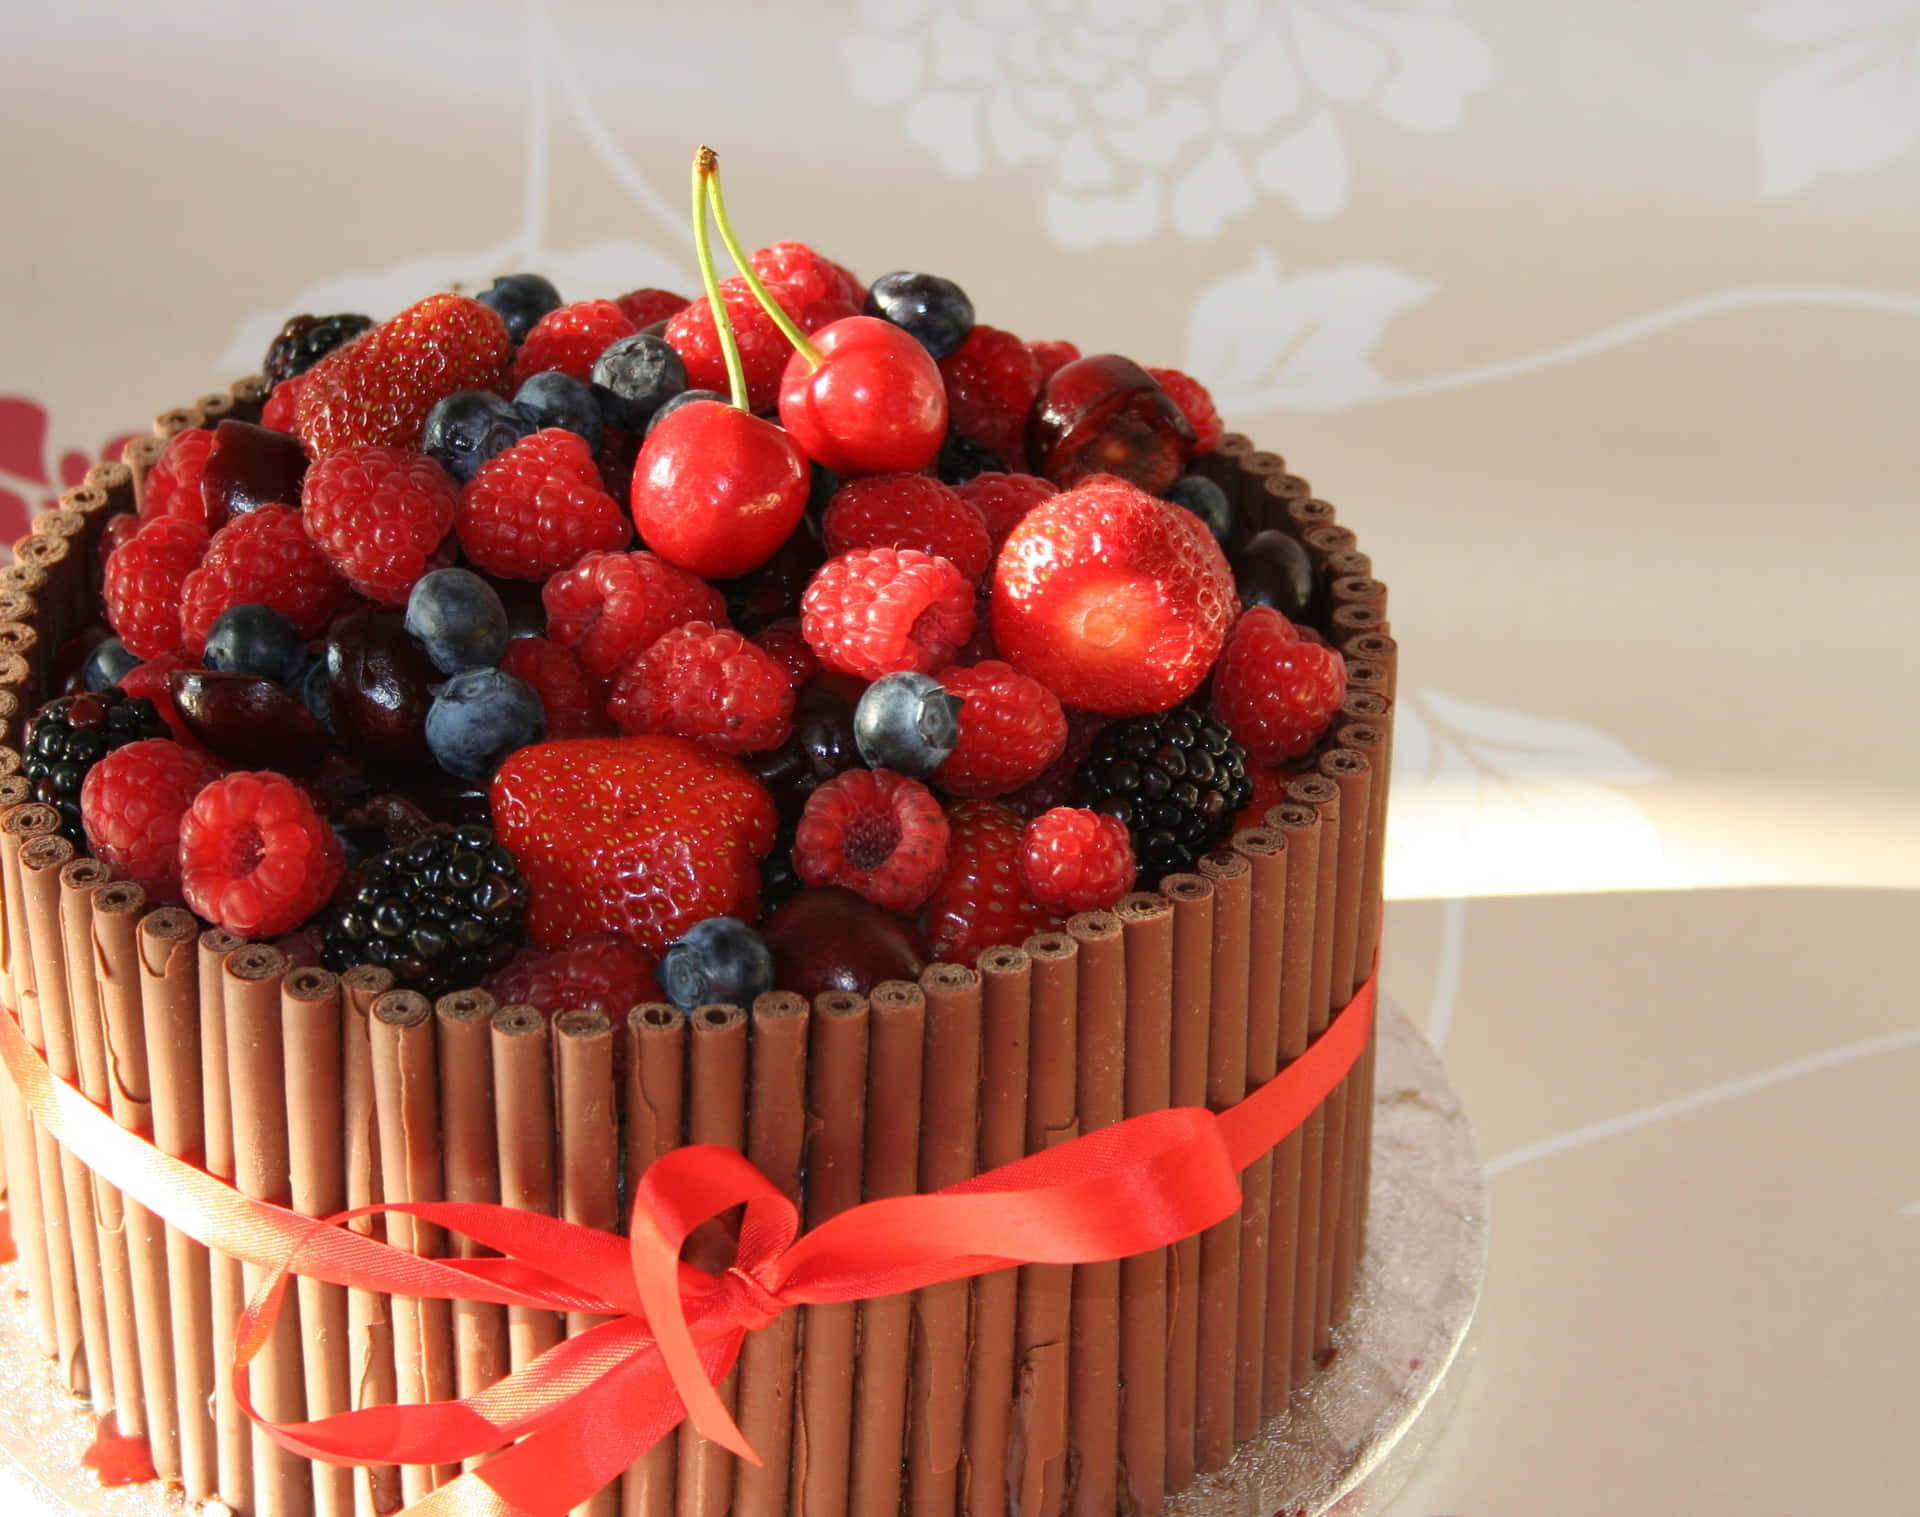 A Cake With Berries On It